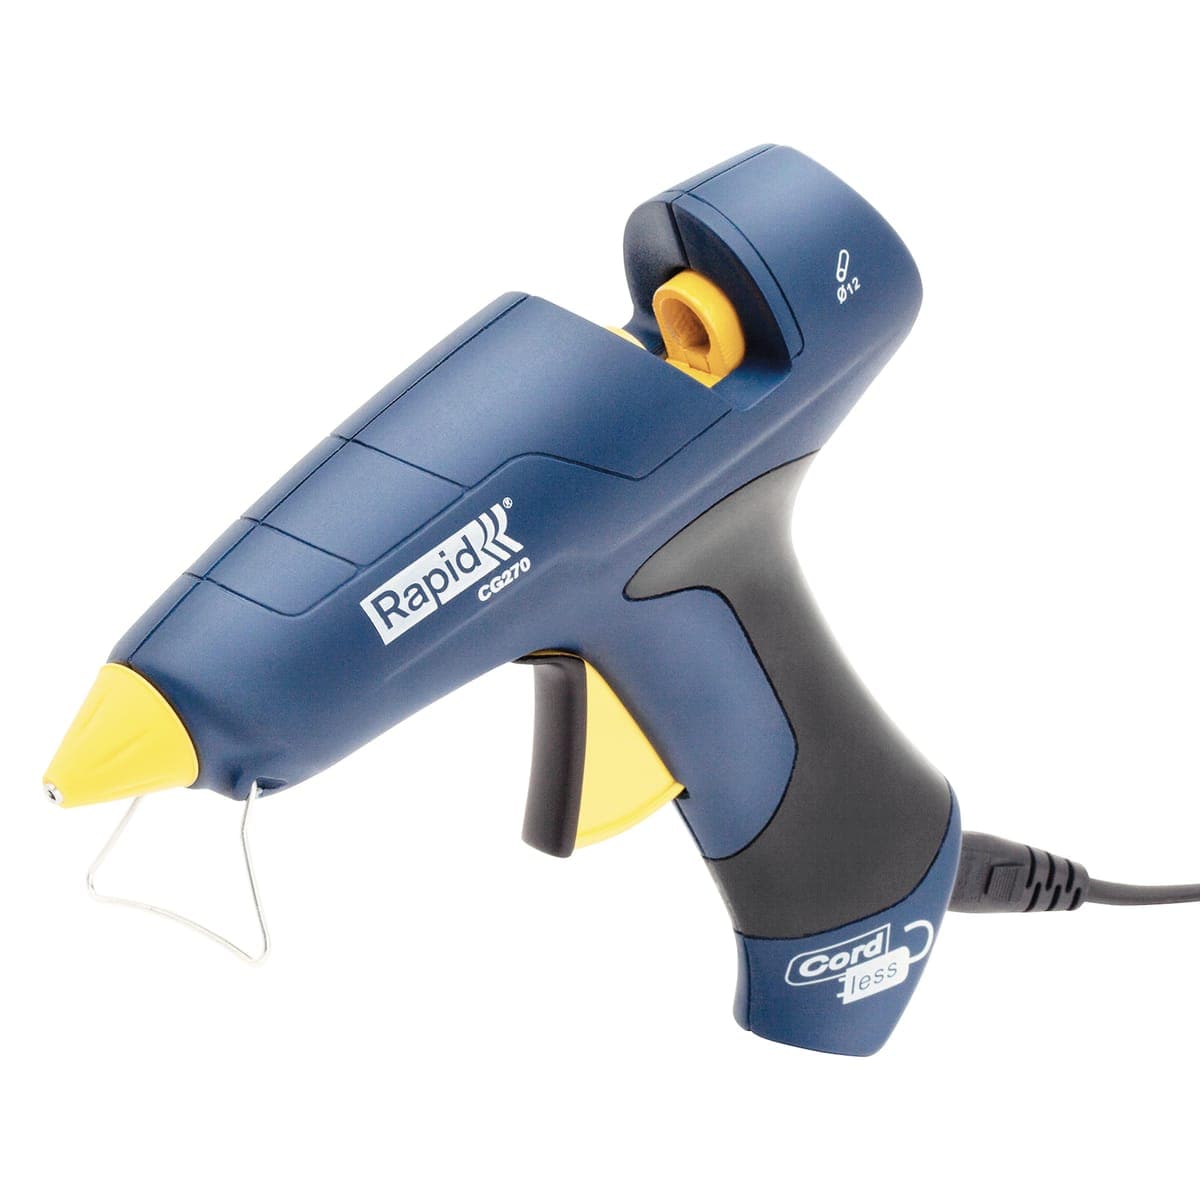 RAPID CG270 HOT-MELT GLUE GUN, FOR 12 MM STICKS, WITH DETACHABLE CABLE - best price from Maltashopper.com BR400230035